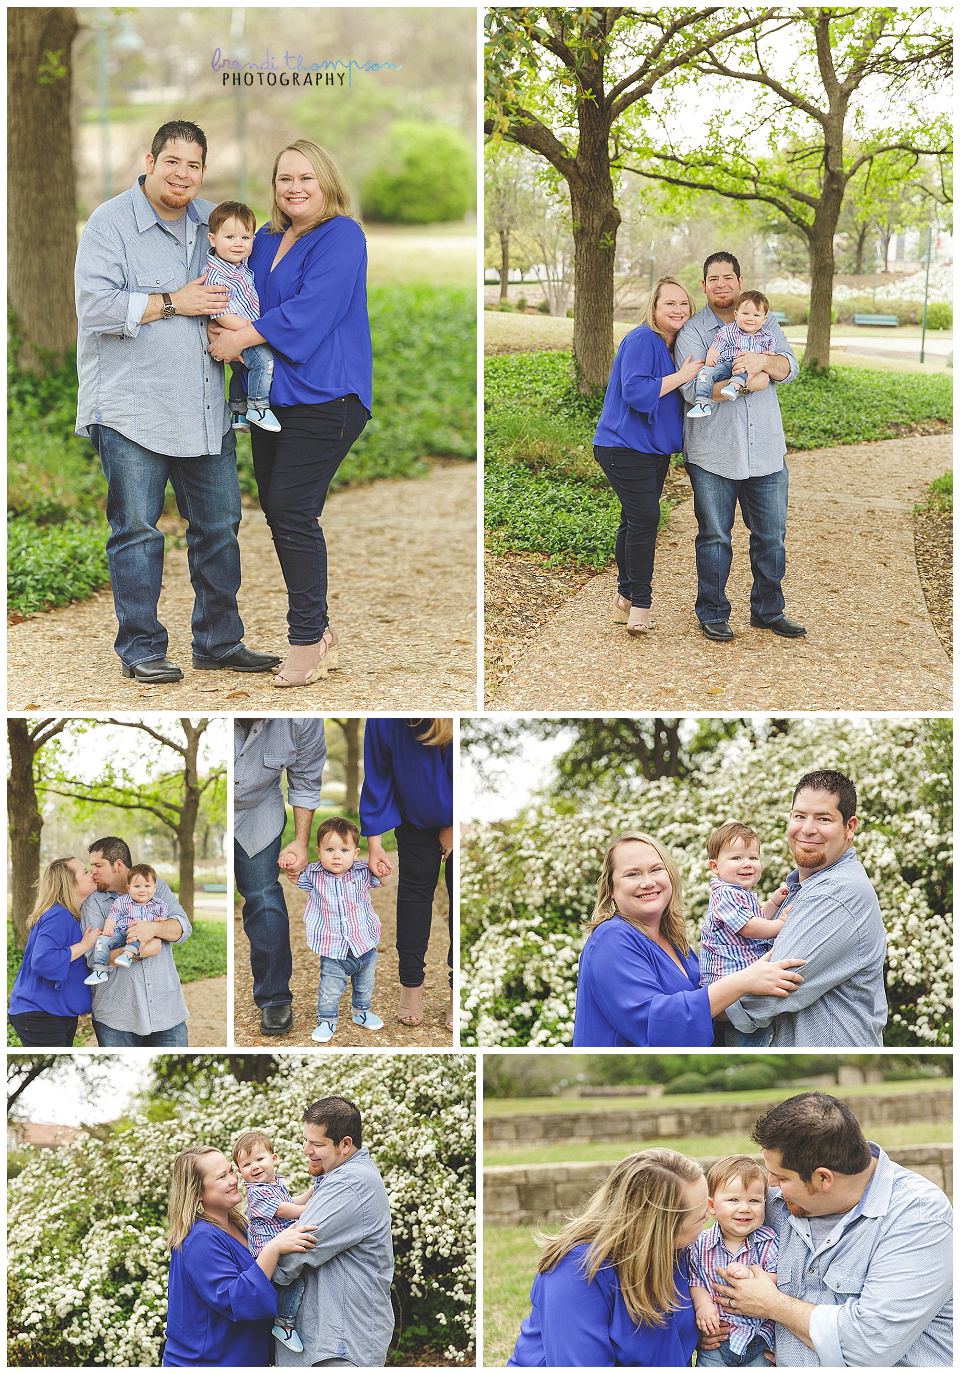 outdoor family photos in frisco park, with one year old baby boy, family dressed in shades of blue